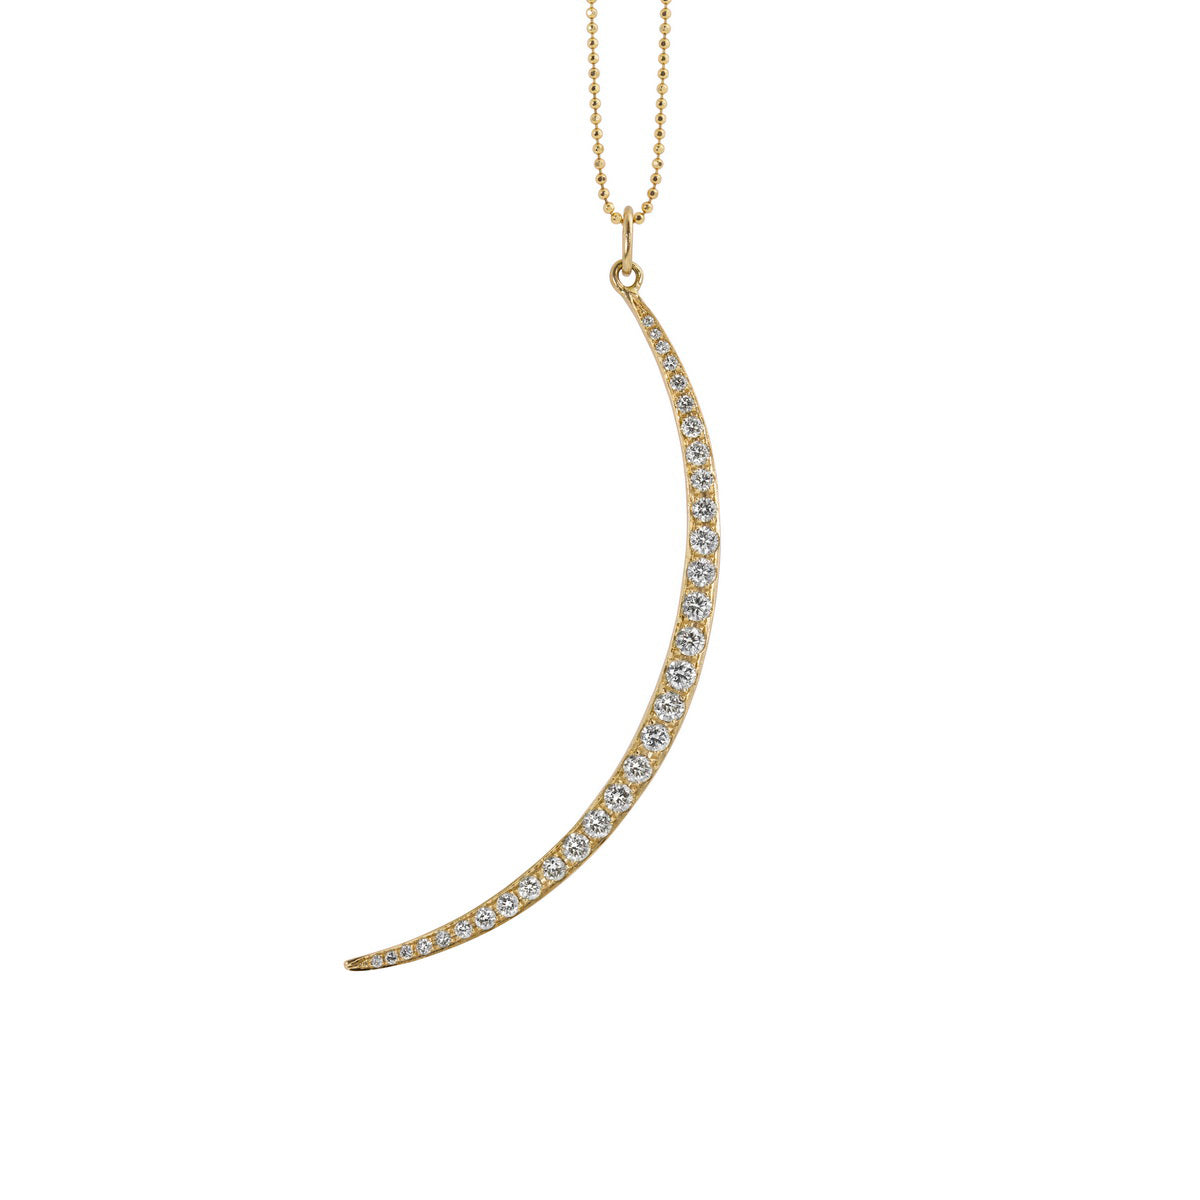 Buy Gold Crescent Moon Necklace Textured Gold Crescent Moon Necklace 925 Moon  Pendant Gold Moon Pendant on Gold Chain, Easy on Infinity Close Online in  India - Etsy